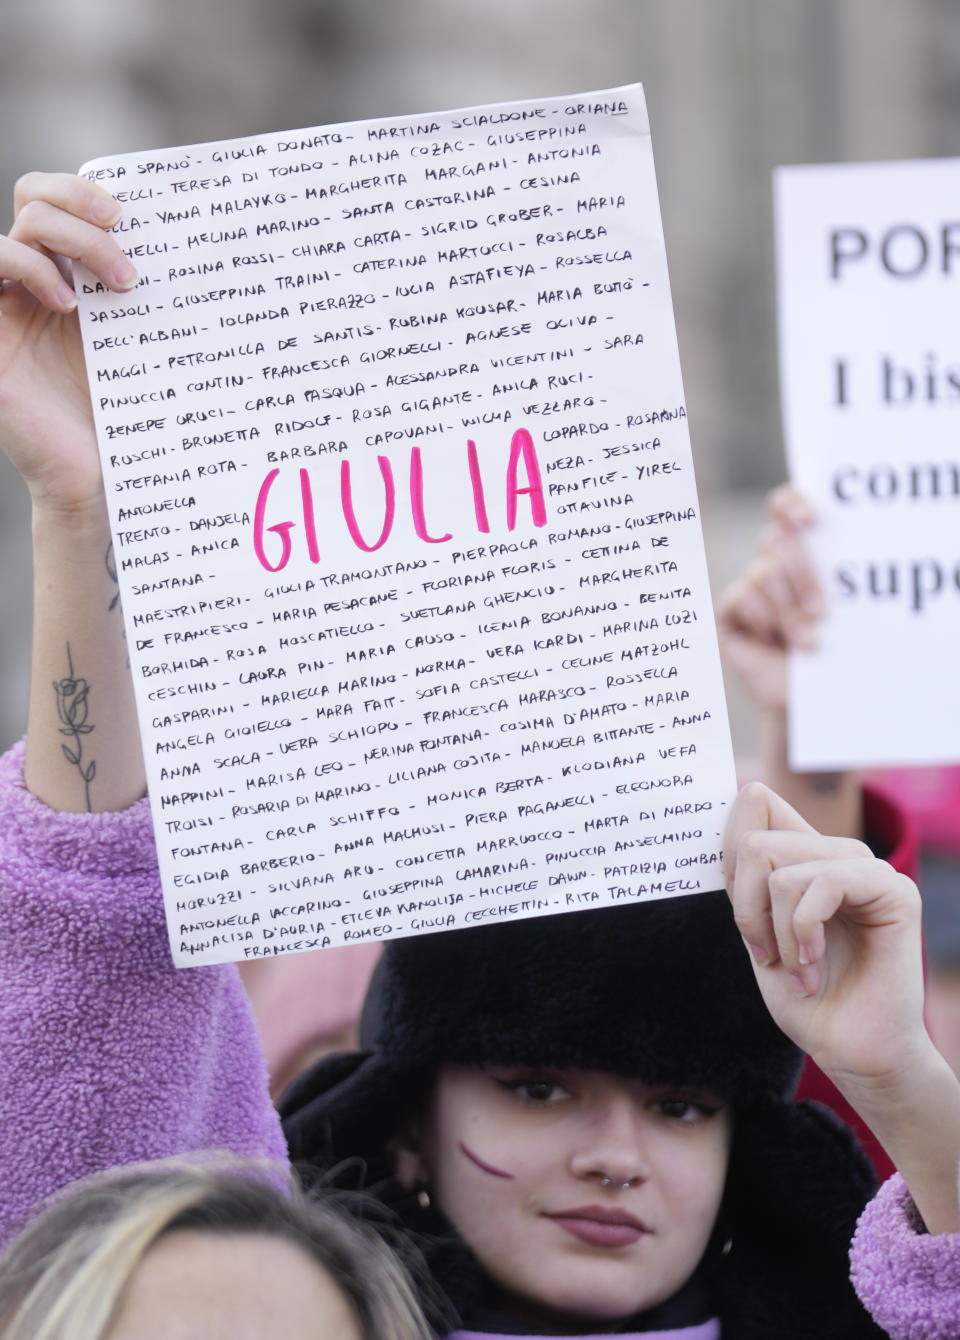 A woman shows a banner bearing the names of femicide victims on the occasion of International Day for the Elimination of Violence against Women, in Milan, Italy, Saturday, Nov.25, 2023. Thousands of people are expected to take the streets in Rome and other major Italian cities as part of what organizers call a "revolution" under way in Italians' approach to violence against women, a few days after the horrifying killing of a college student allegedly by her resentful ex-boyfriend sparked an outcry over the country's "patriarchal" culture. (AP Photo/Luca Bruno)